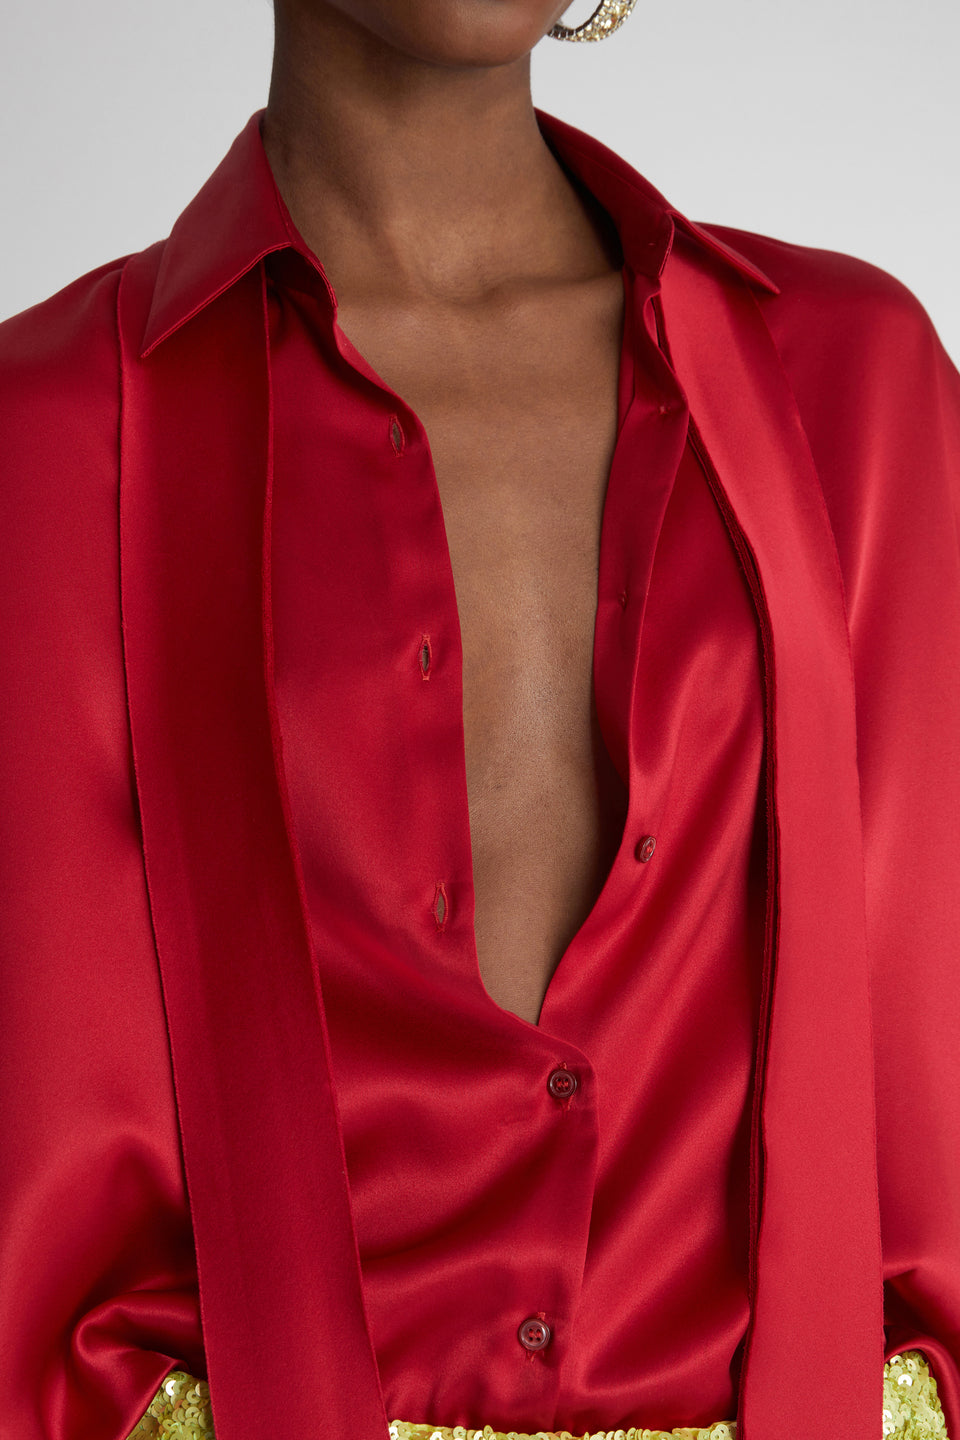 Oversized shirt in red silk